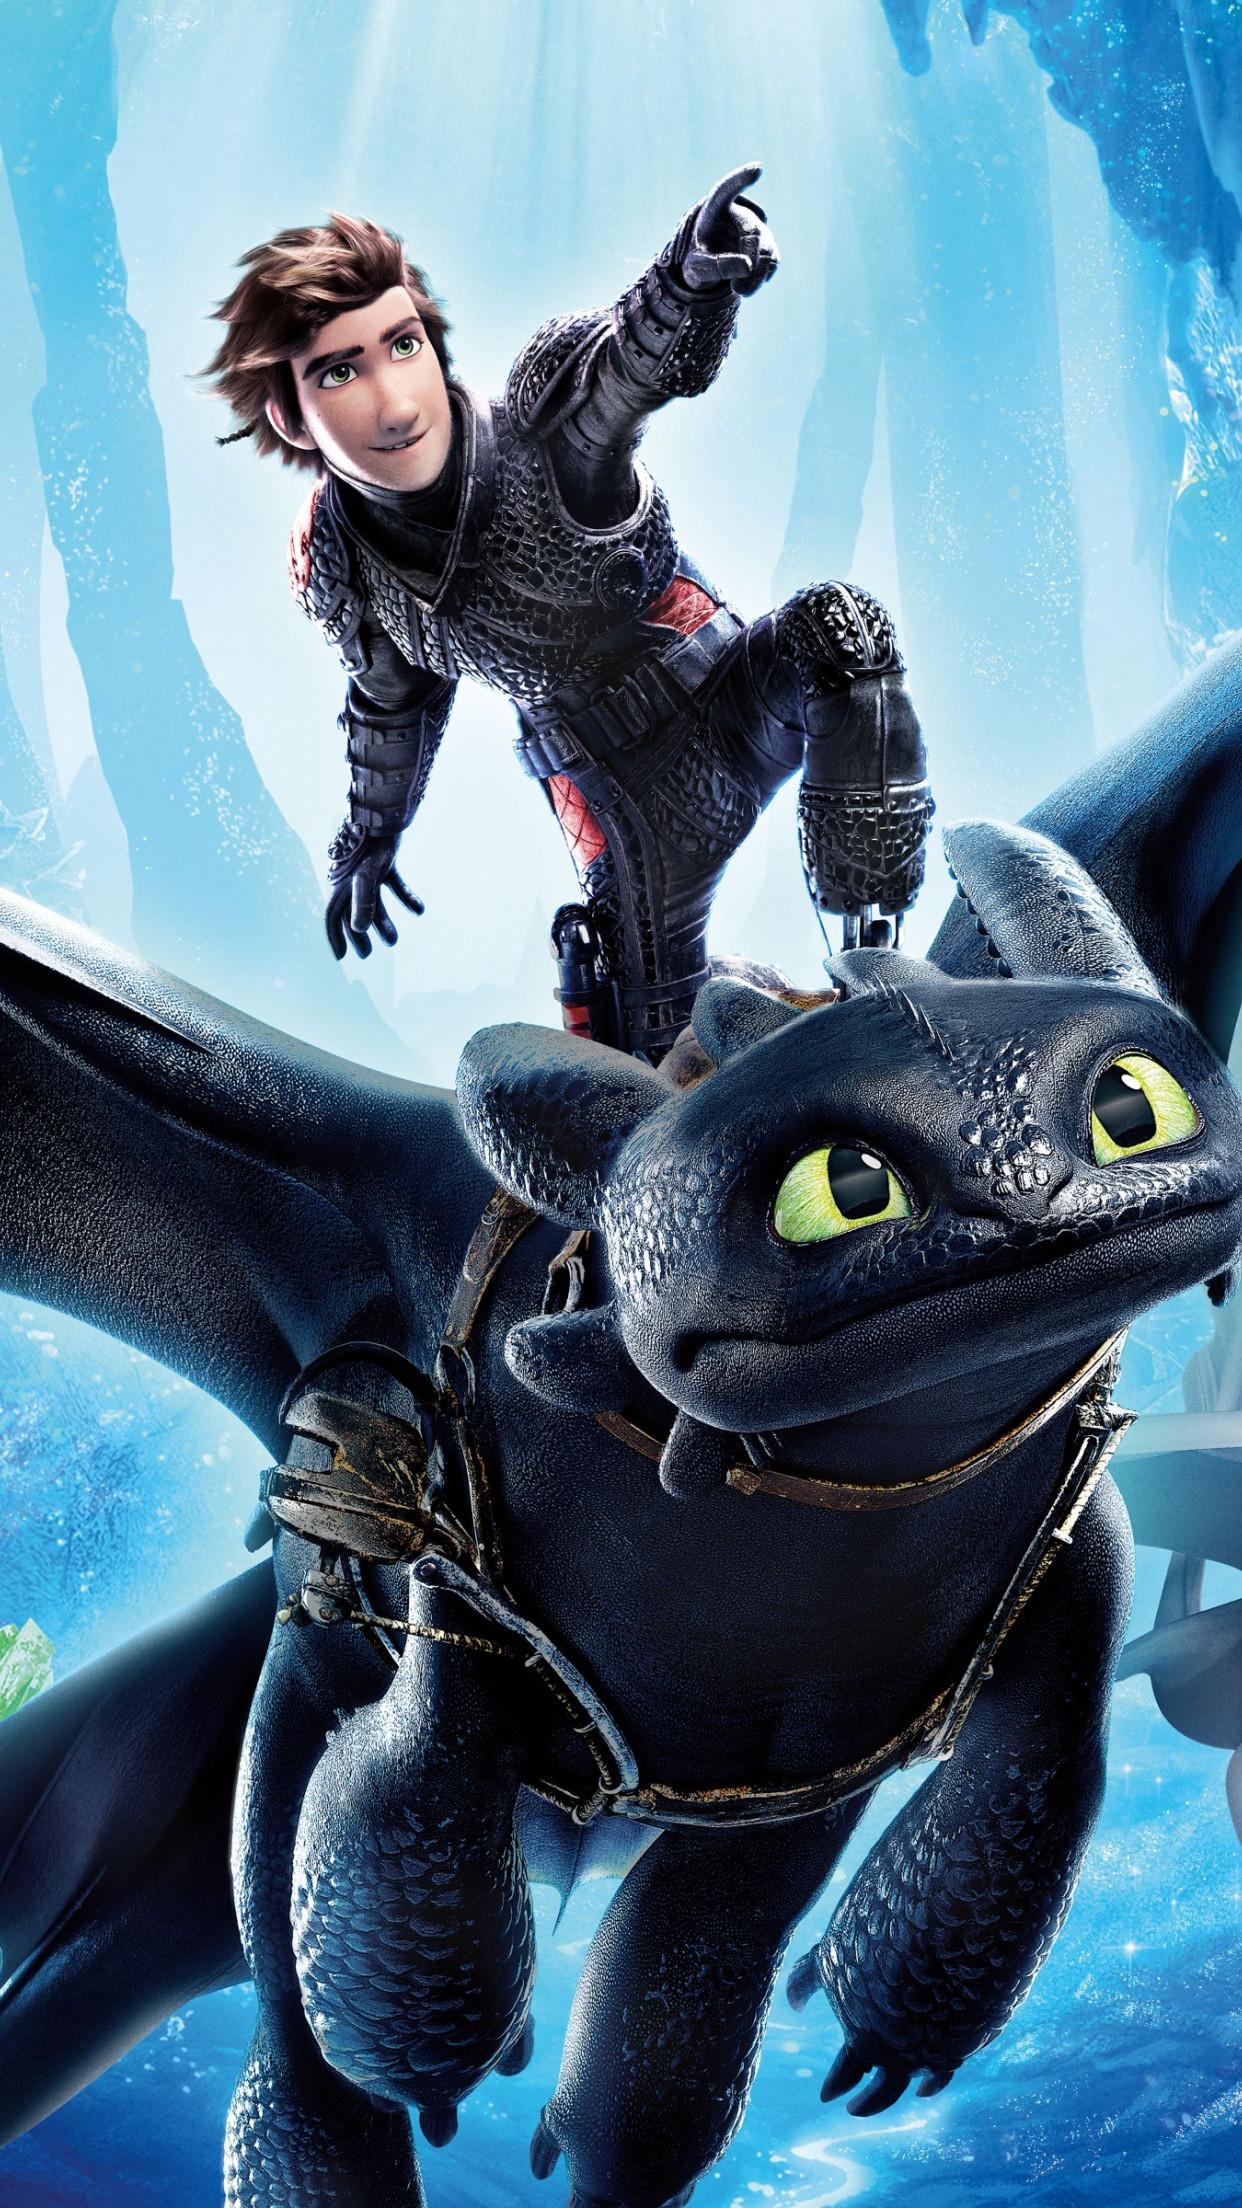 Download wallpaper: How to Train Your Dragon 2019 1242x2208